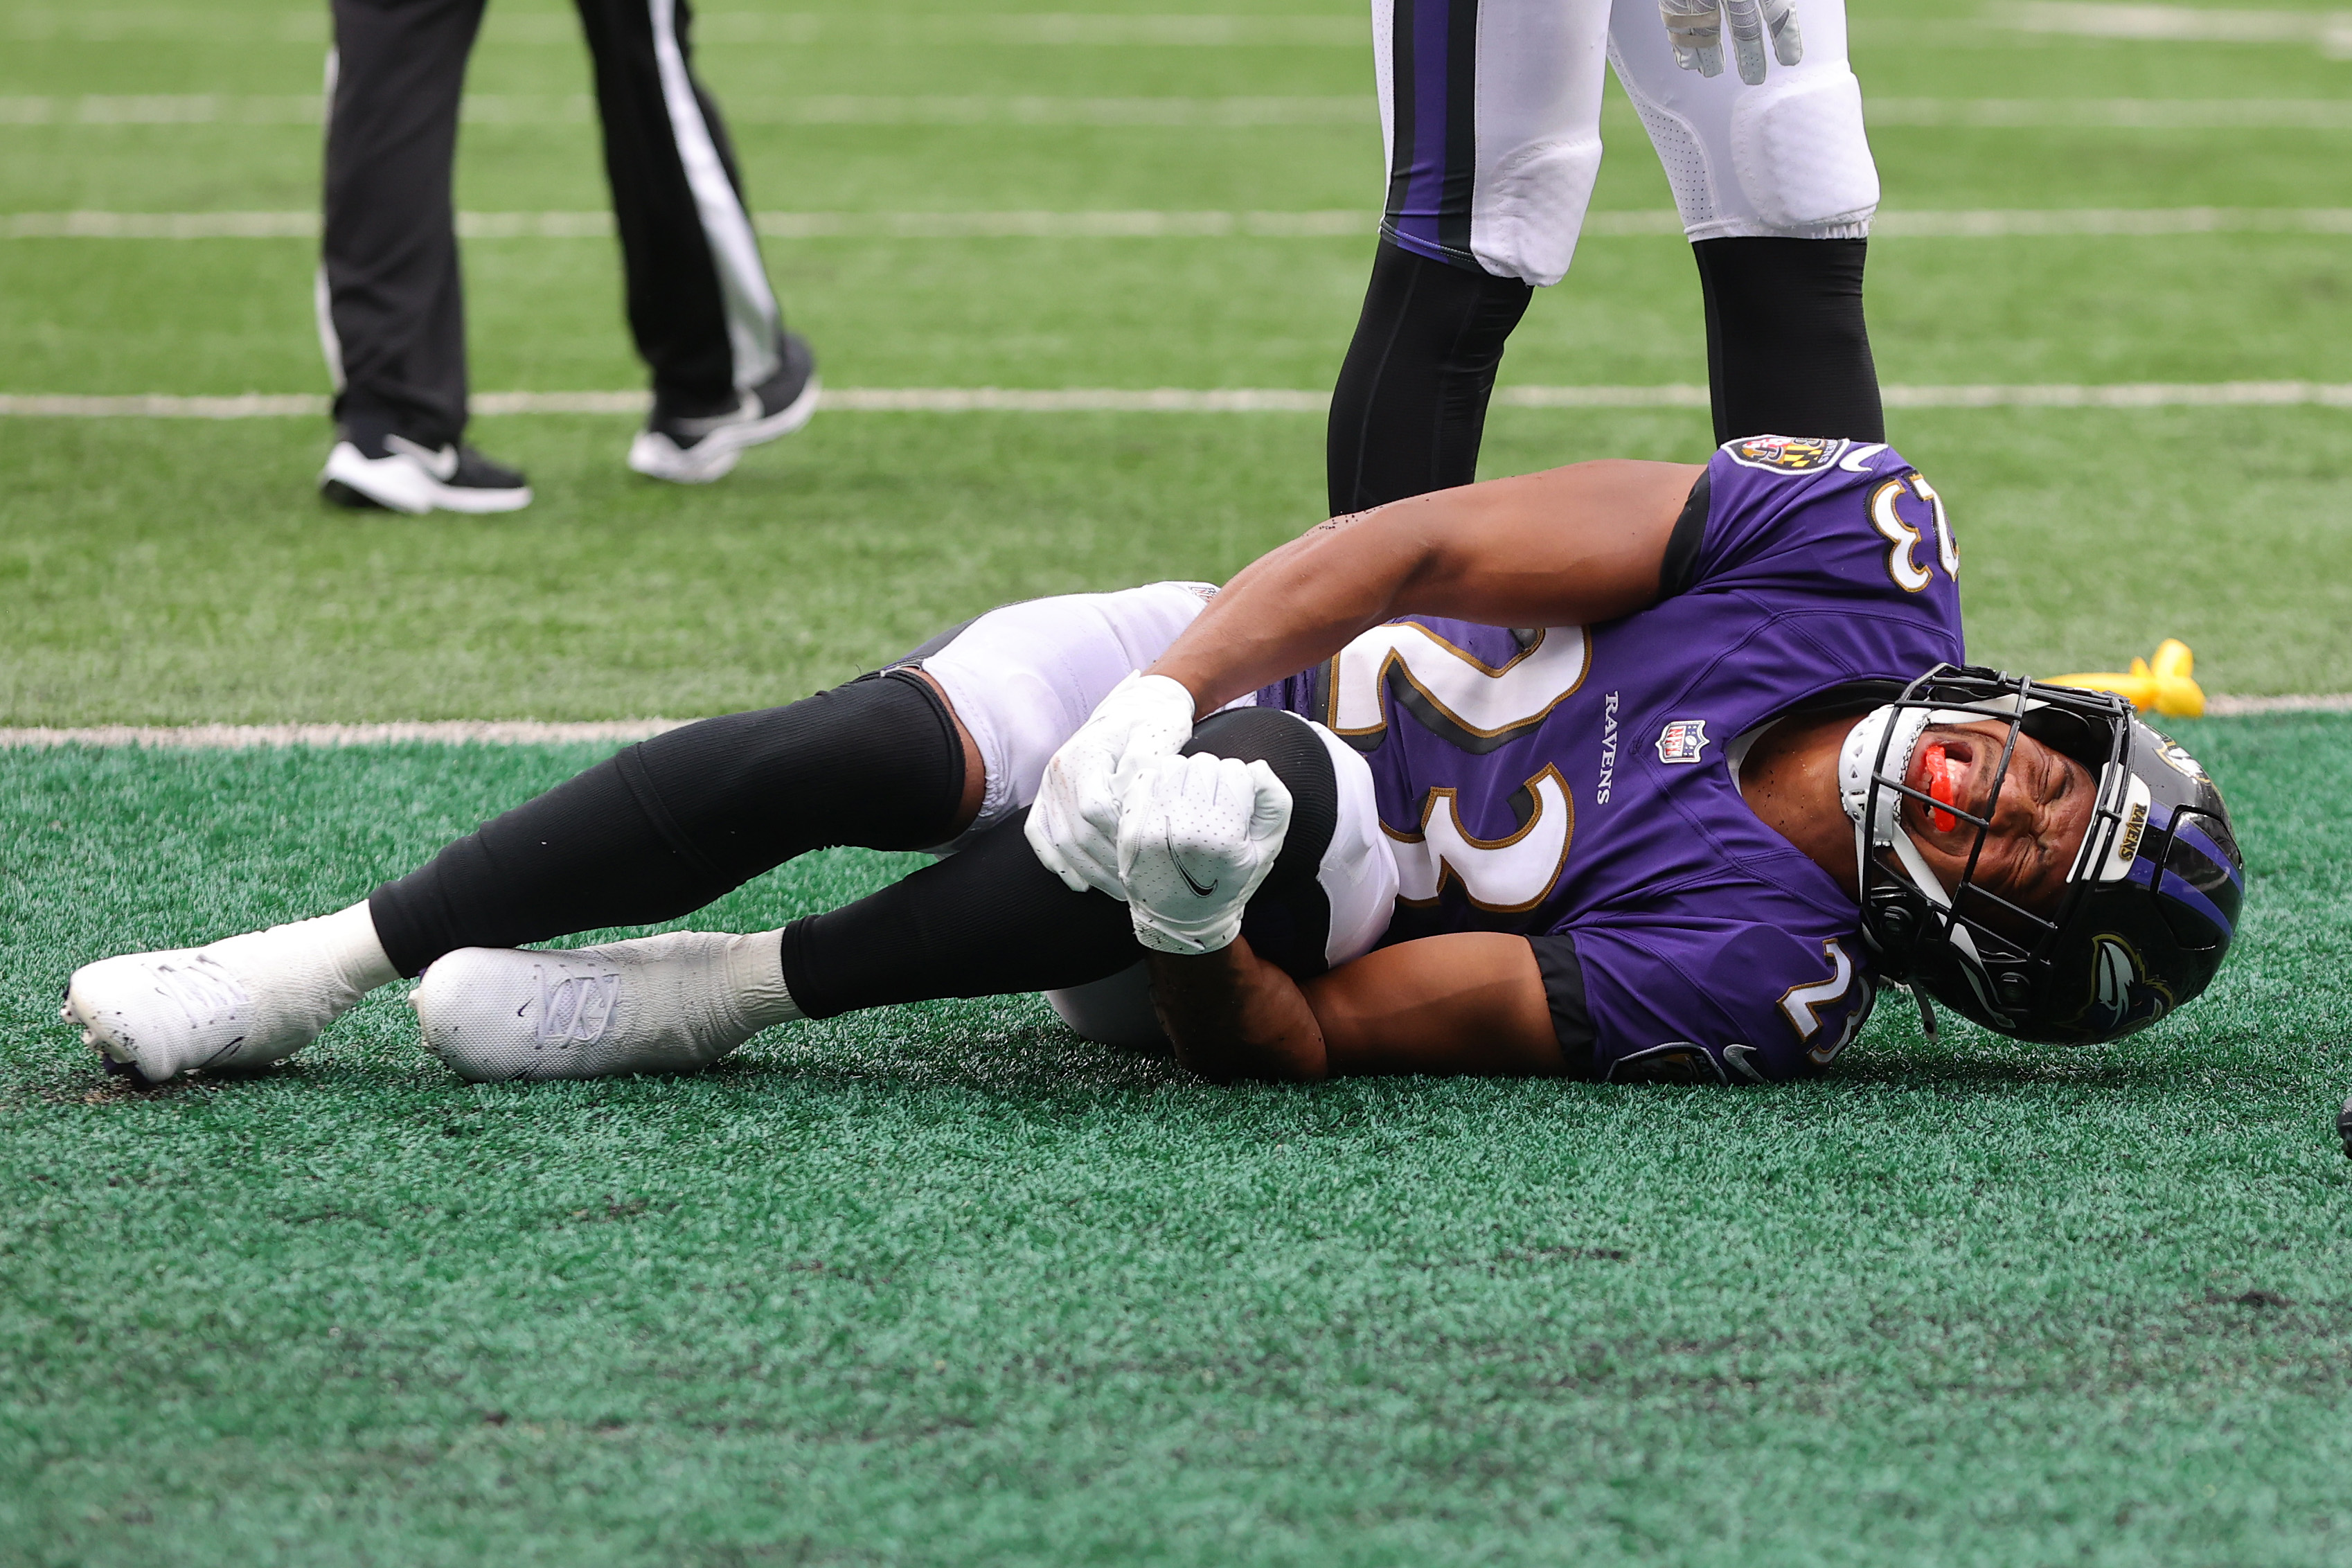 Cornerback Kyler Fuller of the Baltimore Ravens lies on the ground after sustaining an injury during the game against the New York Jets at the MetLife Stadium in East Rutherford, New Jersey, September 11, 2022. /CFP